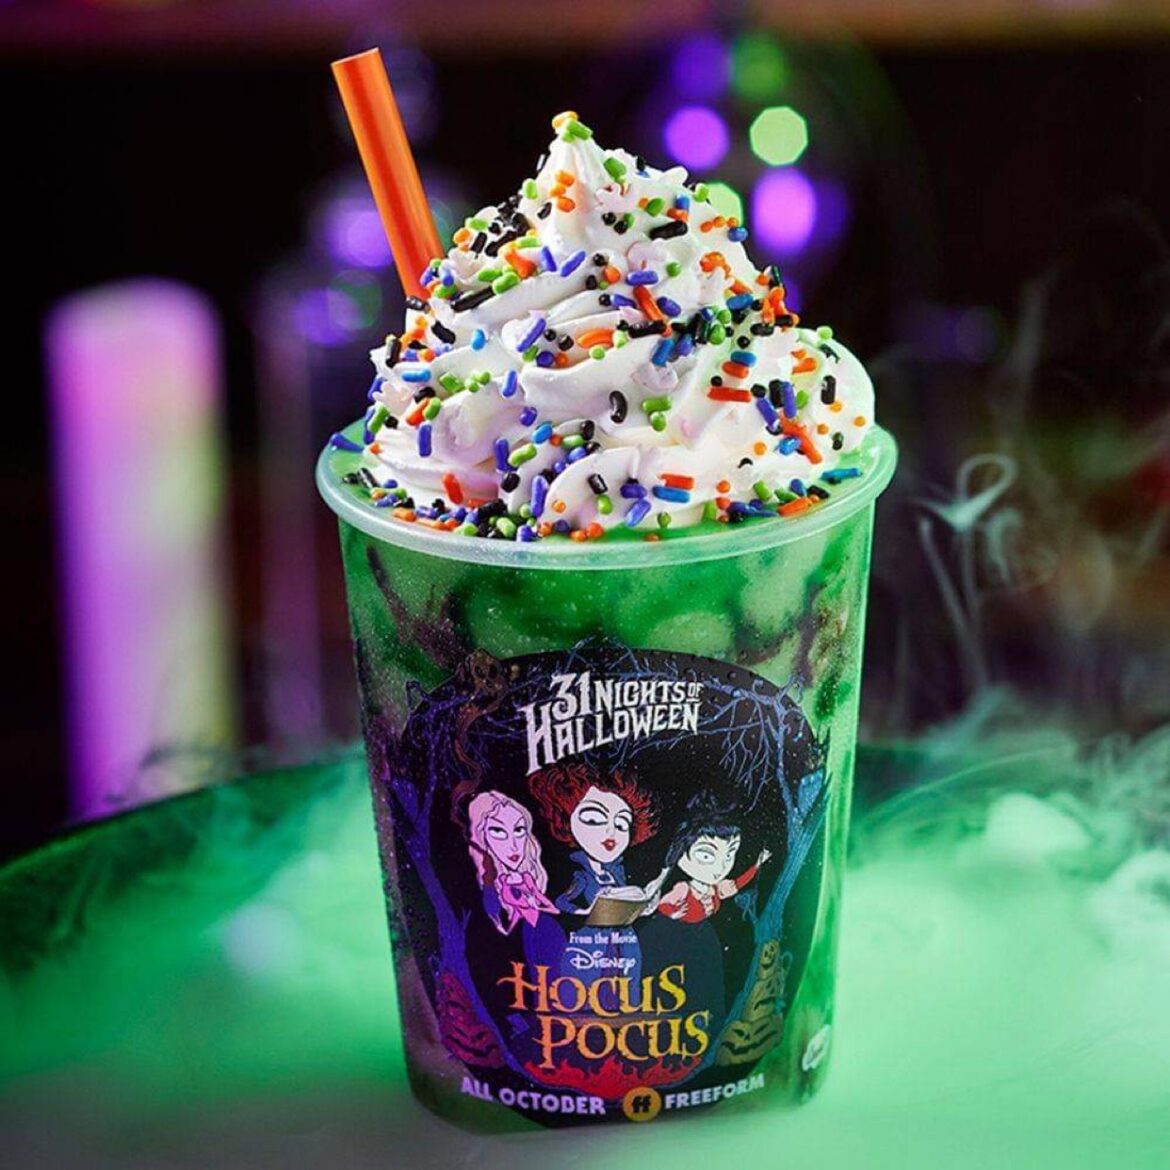 Hocus Pocus Shake & Limited Edition Cup at Carvel